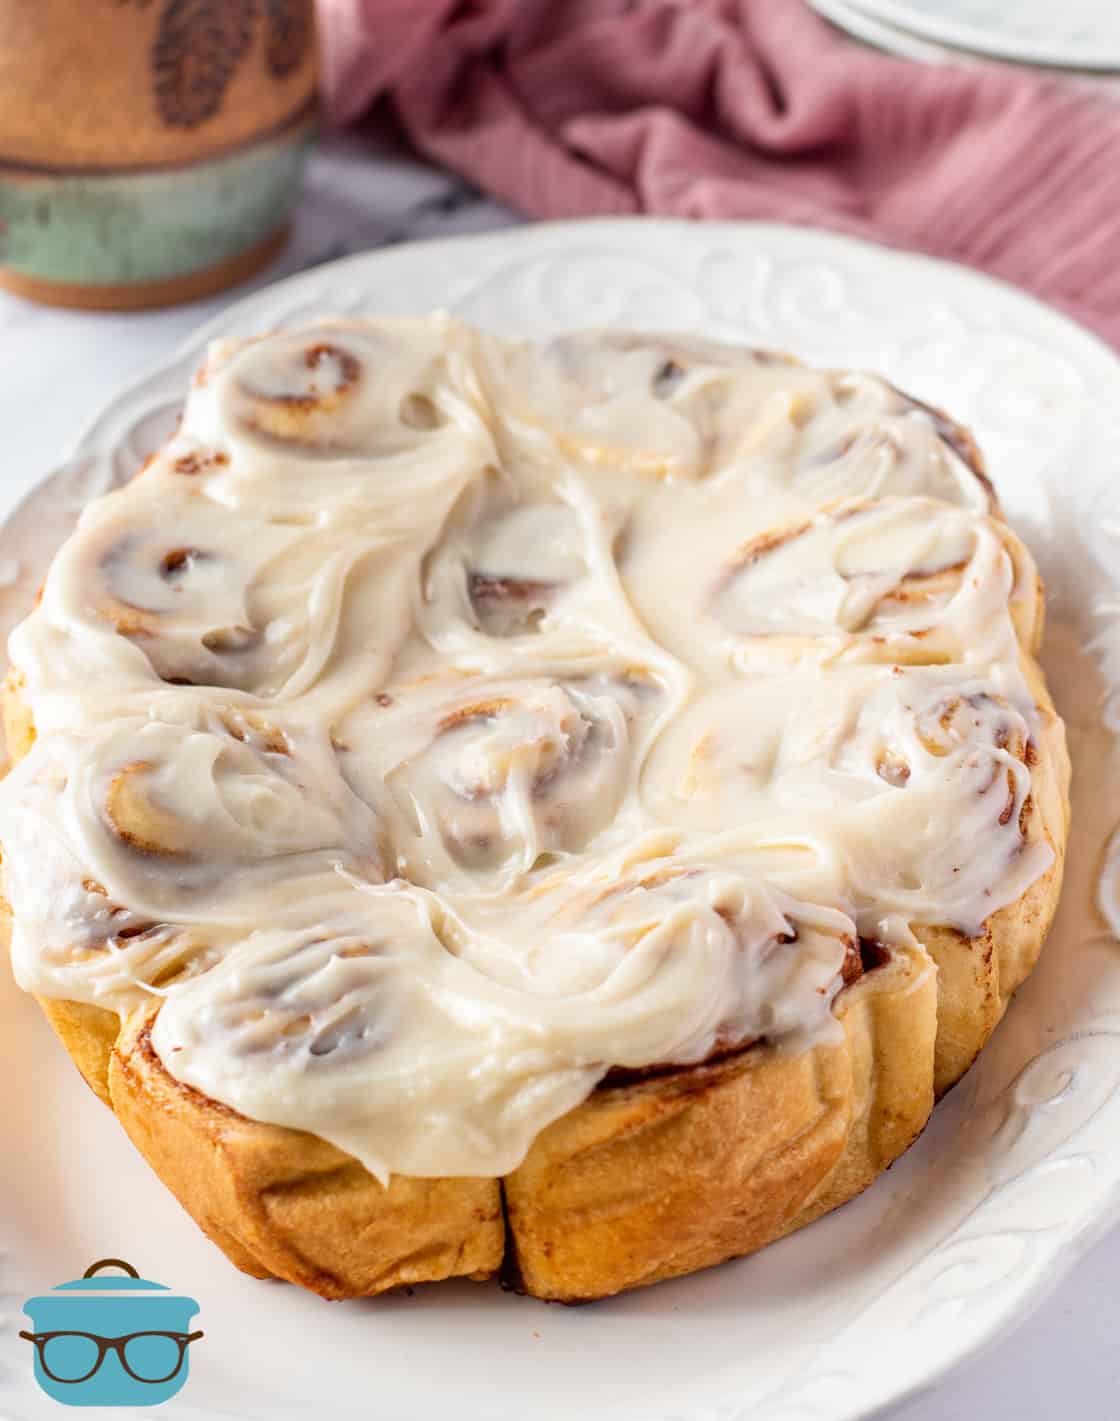 fully baked cinnamon rolls topped with cream cheese icing, shown on a white oval platter